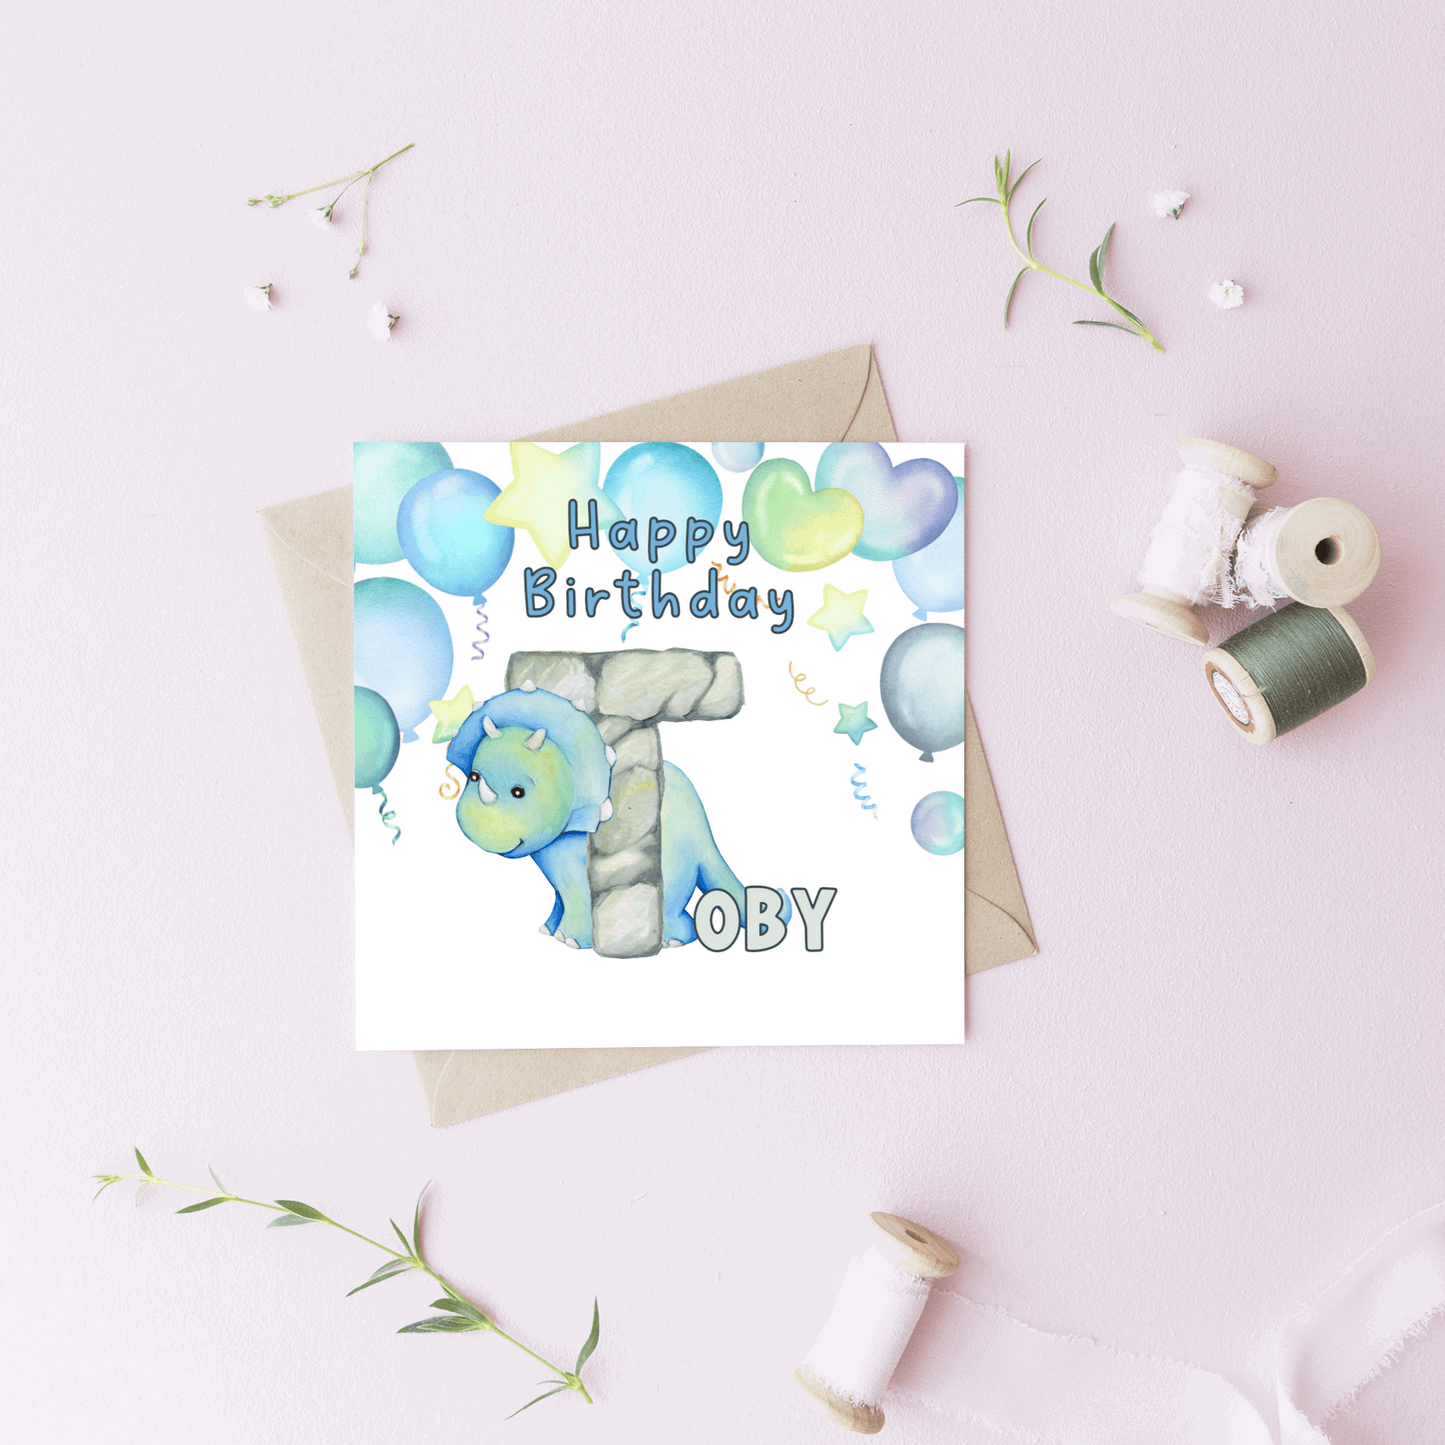 Dinosaur birthday card - Moose and Goose Gifts